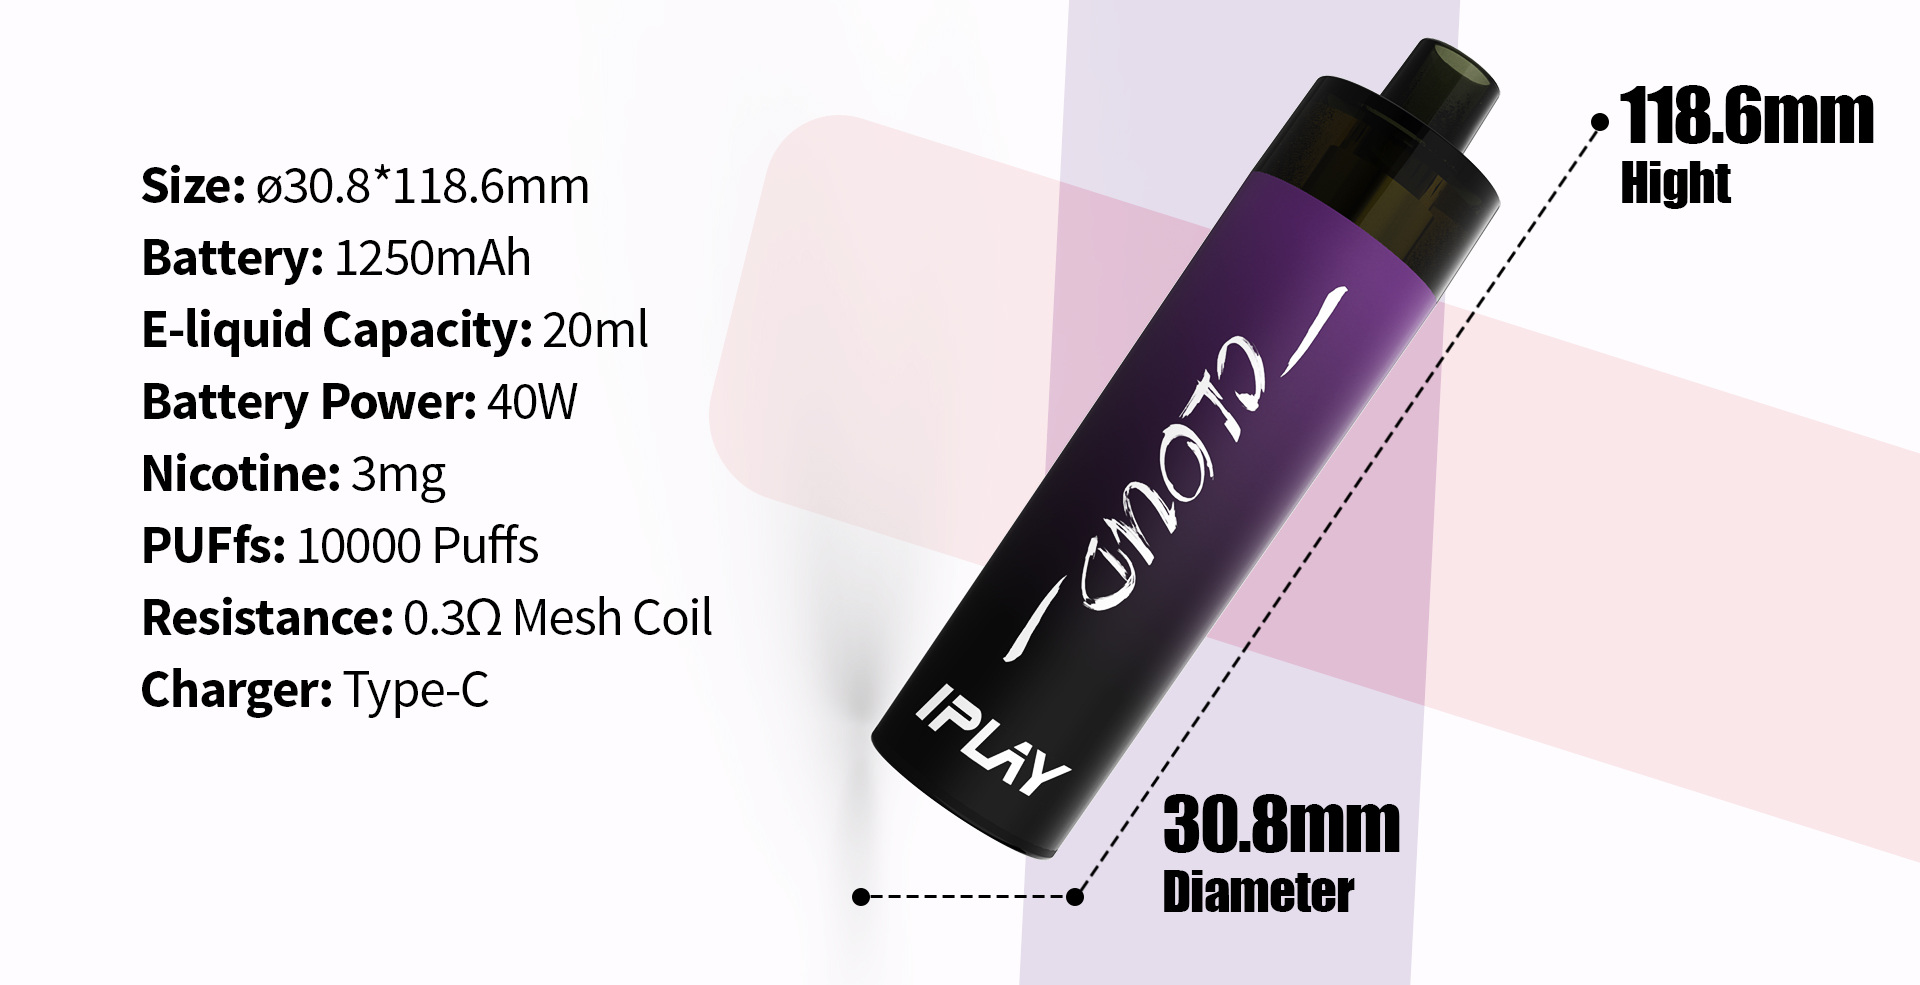 IPLAY CLOUD DISPOSABLE - SPECIFICATION